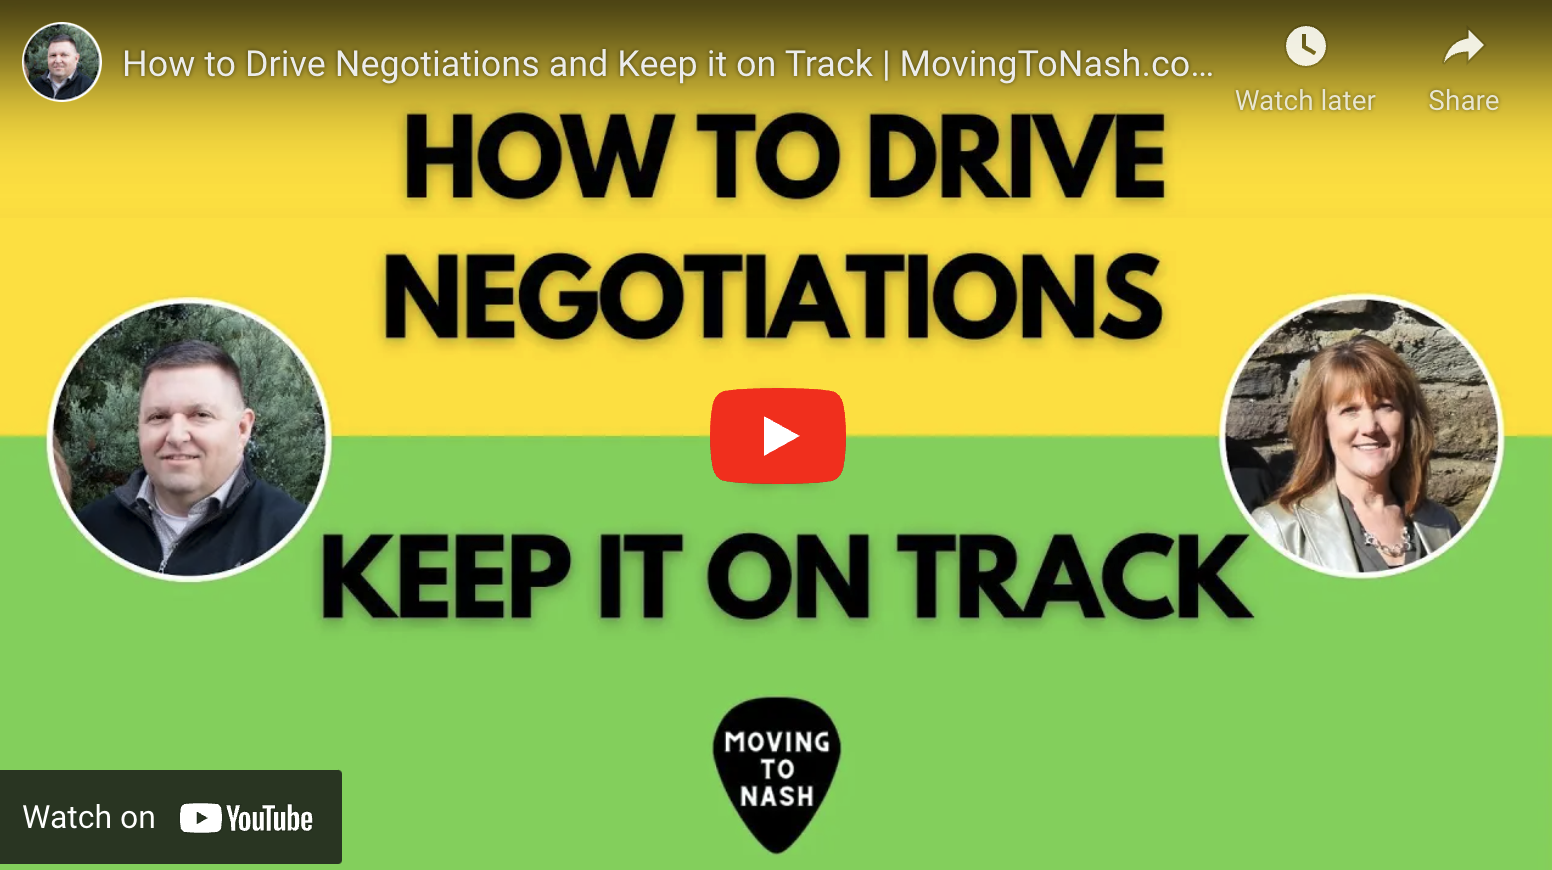 How to Drive Negotiations and Keep it on Track